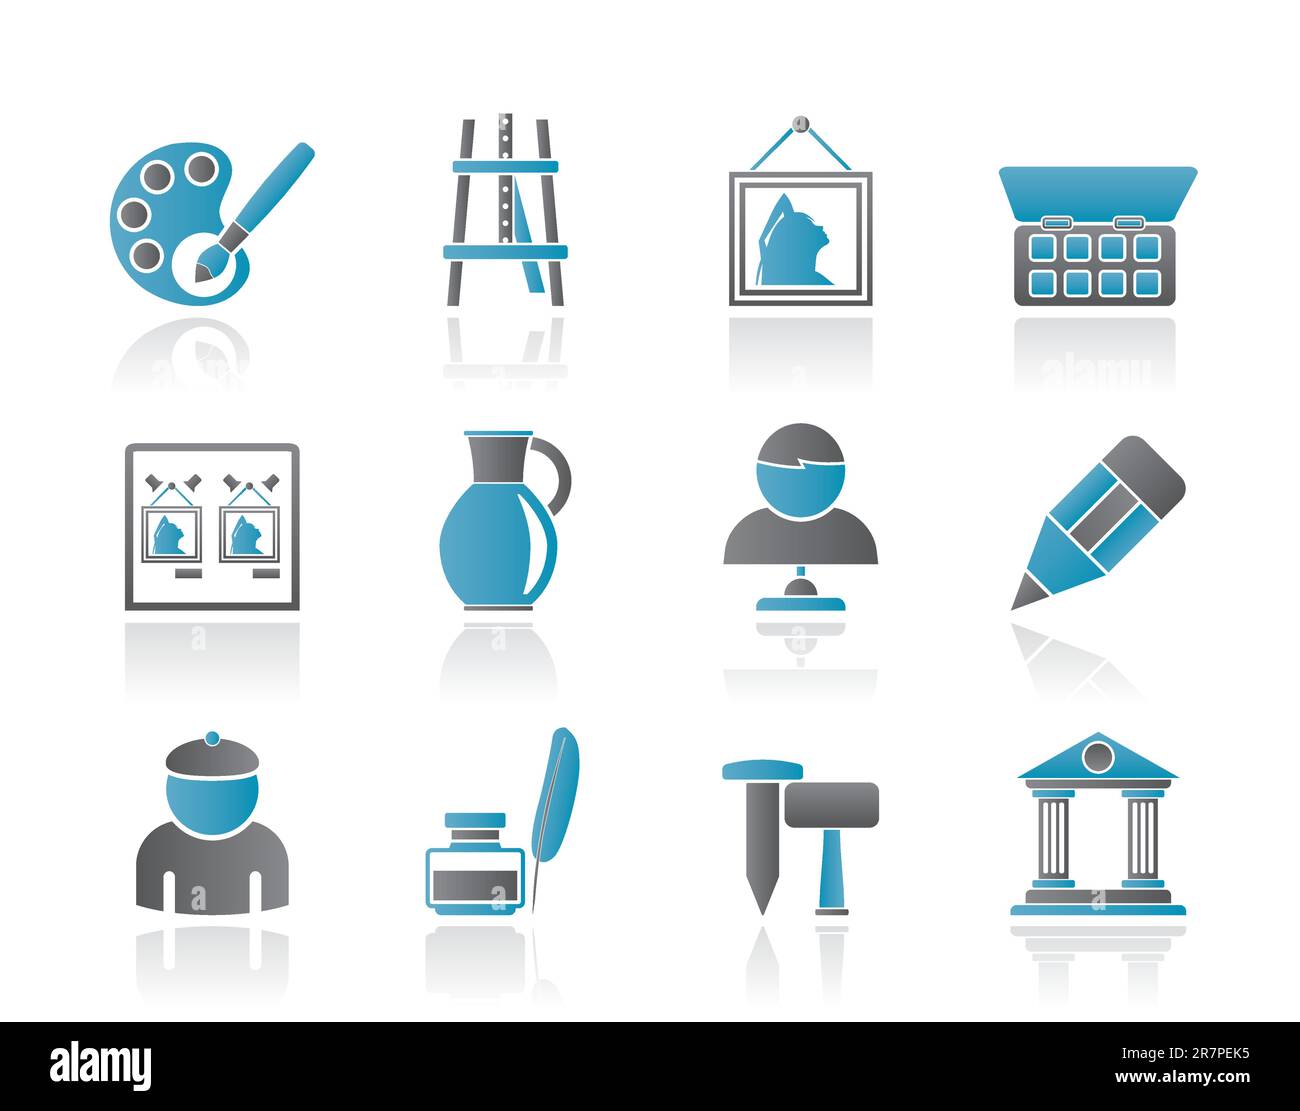 Fine art objects icons - vector icon set Stock Vector